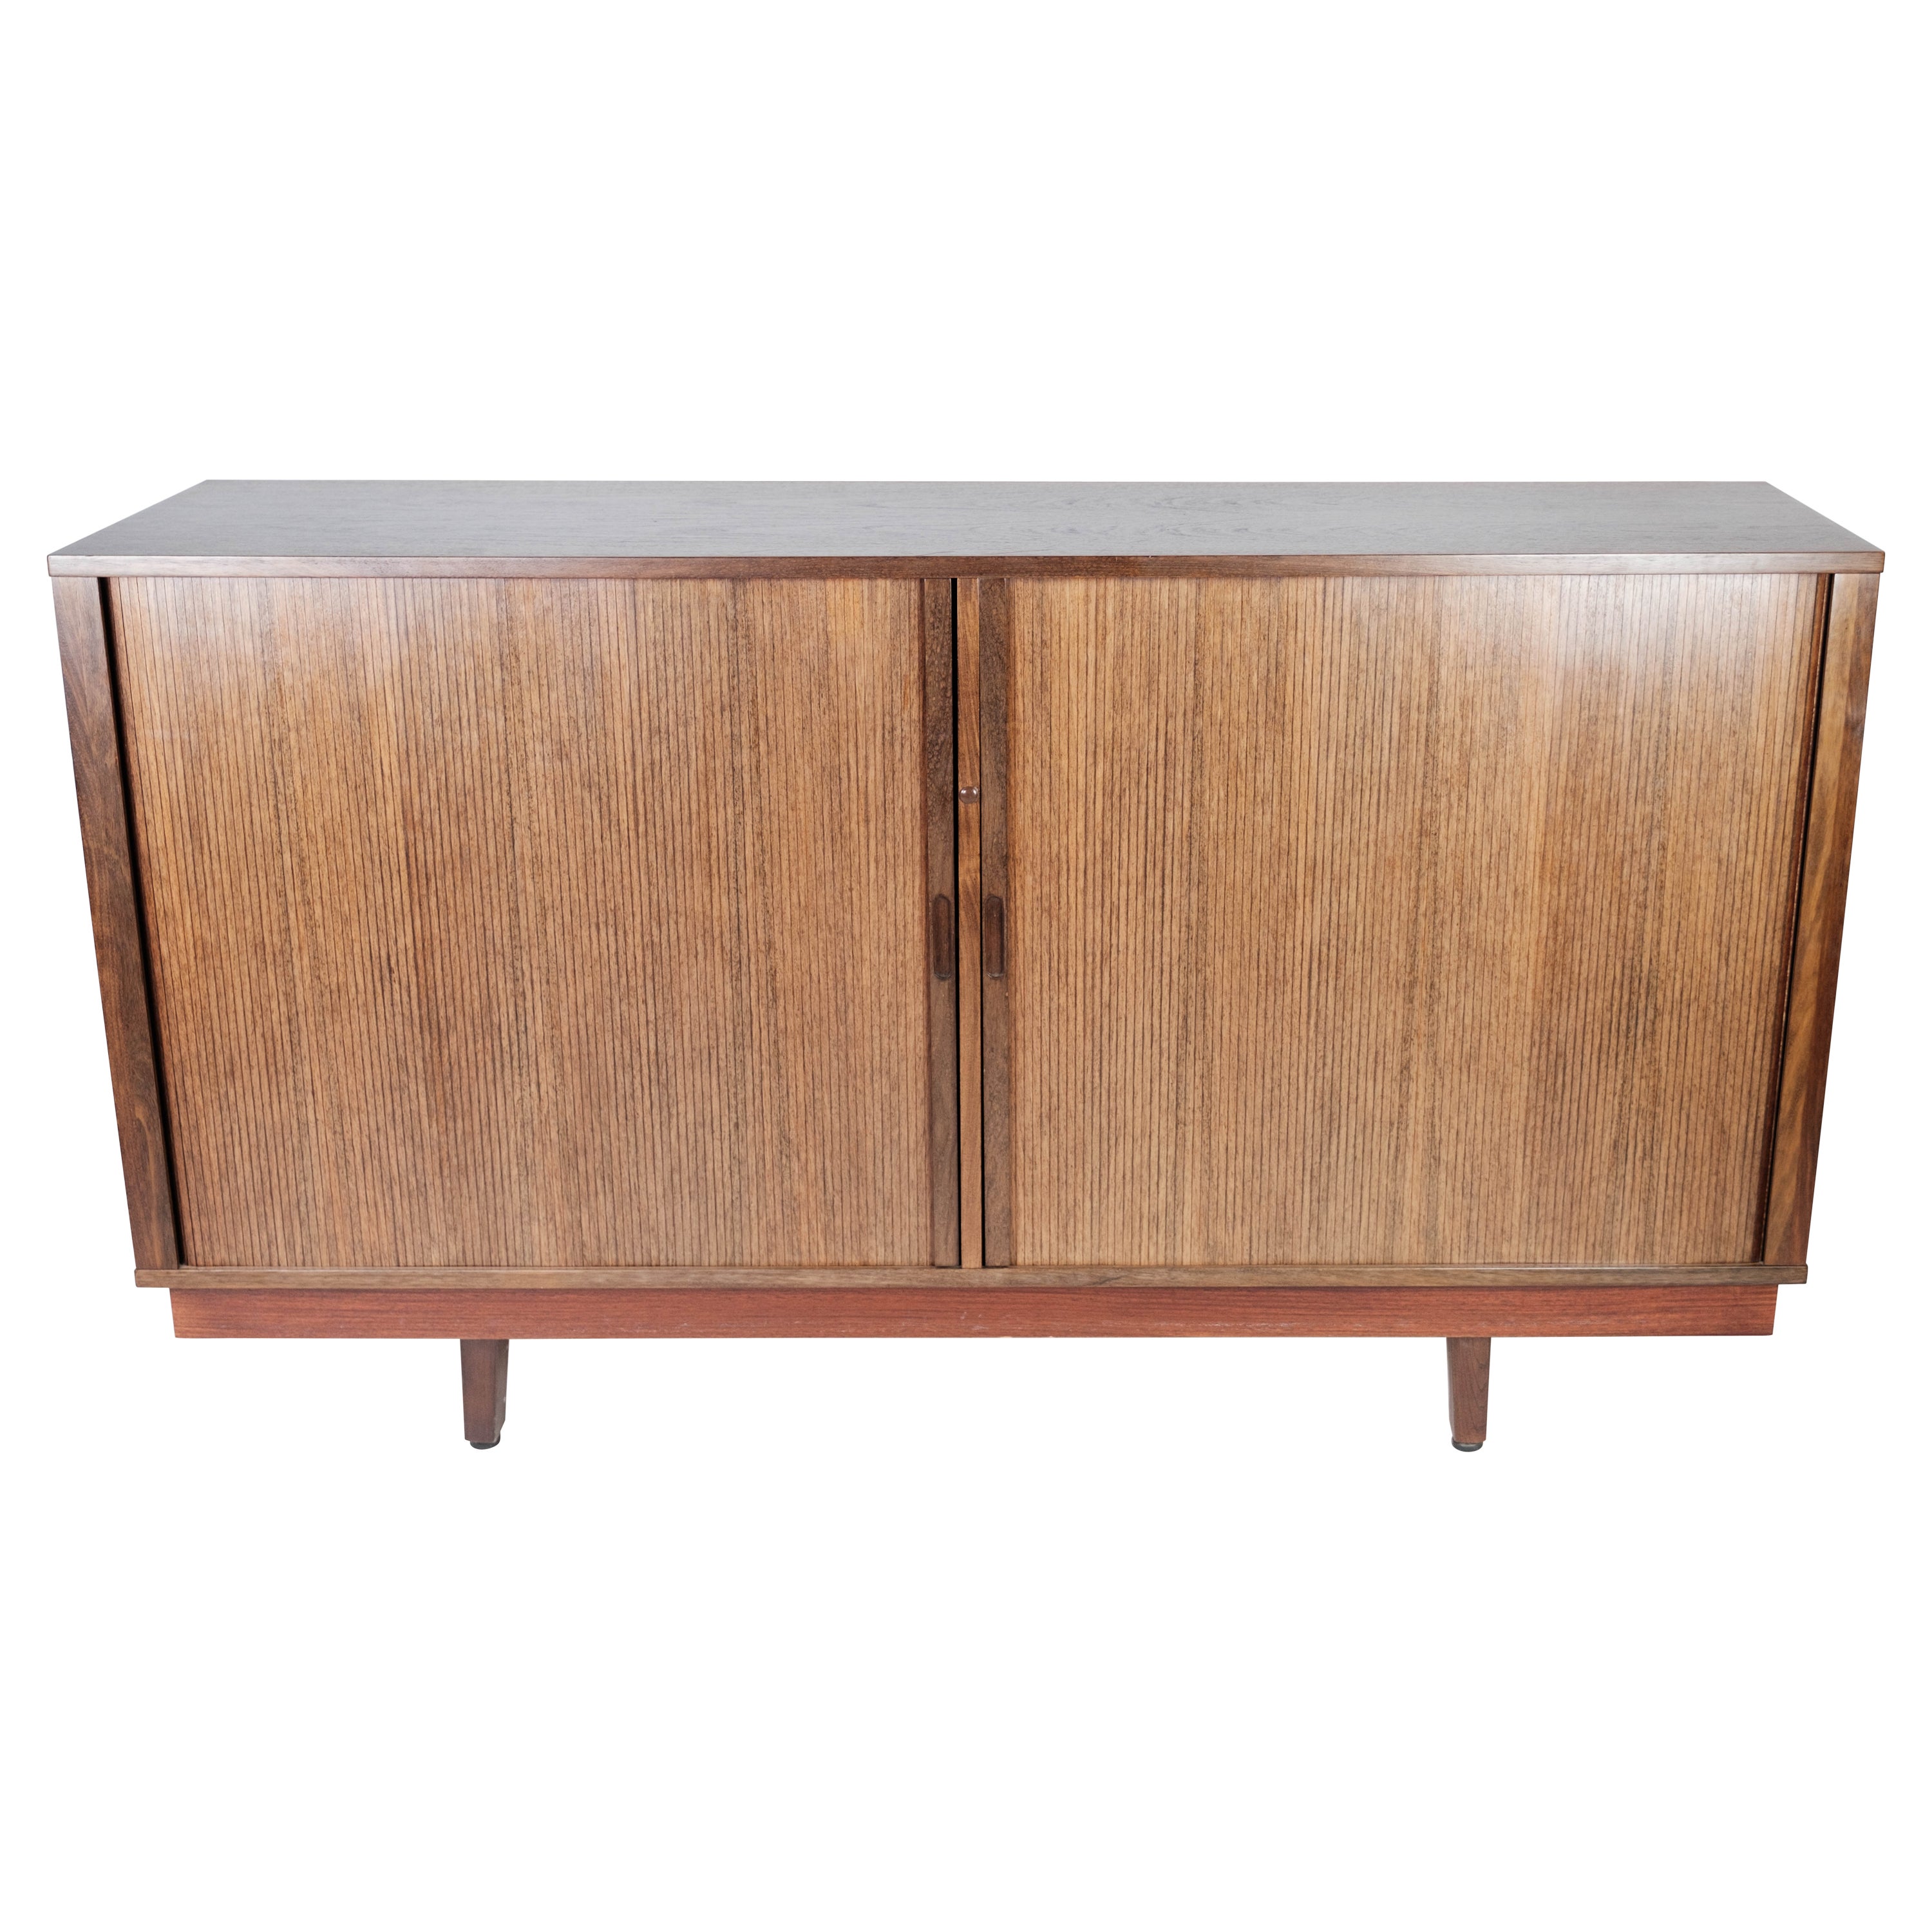 Low Sideboard with Sliding Doors in Rosewood of Danish Design from the 1960s